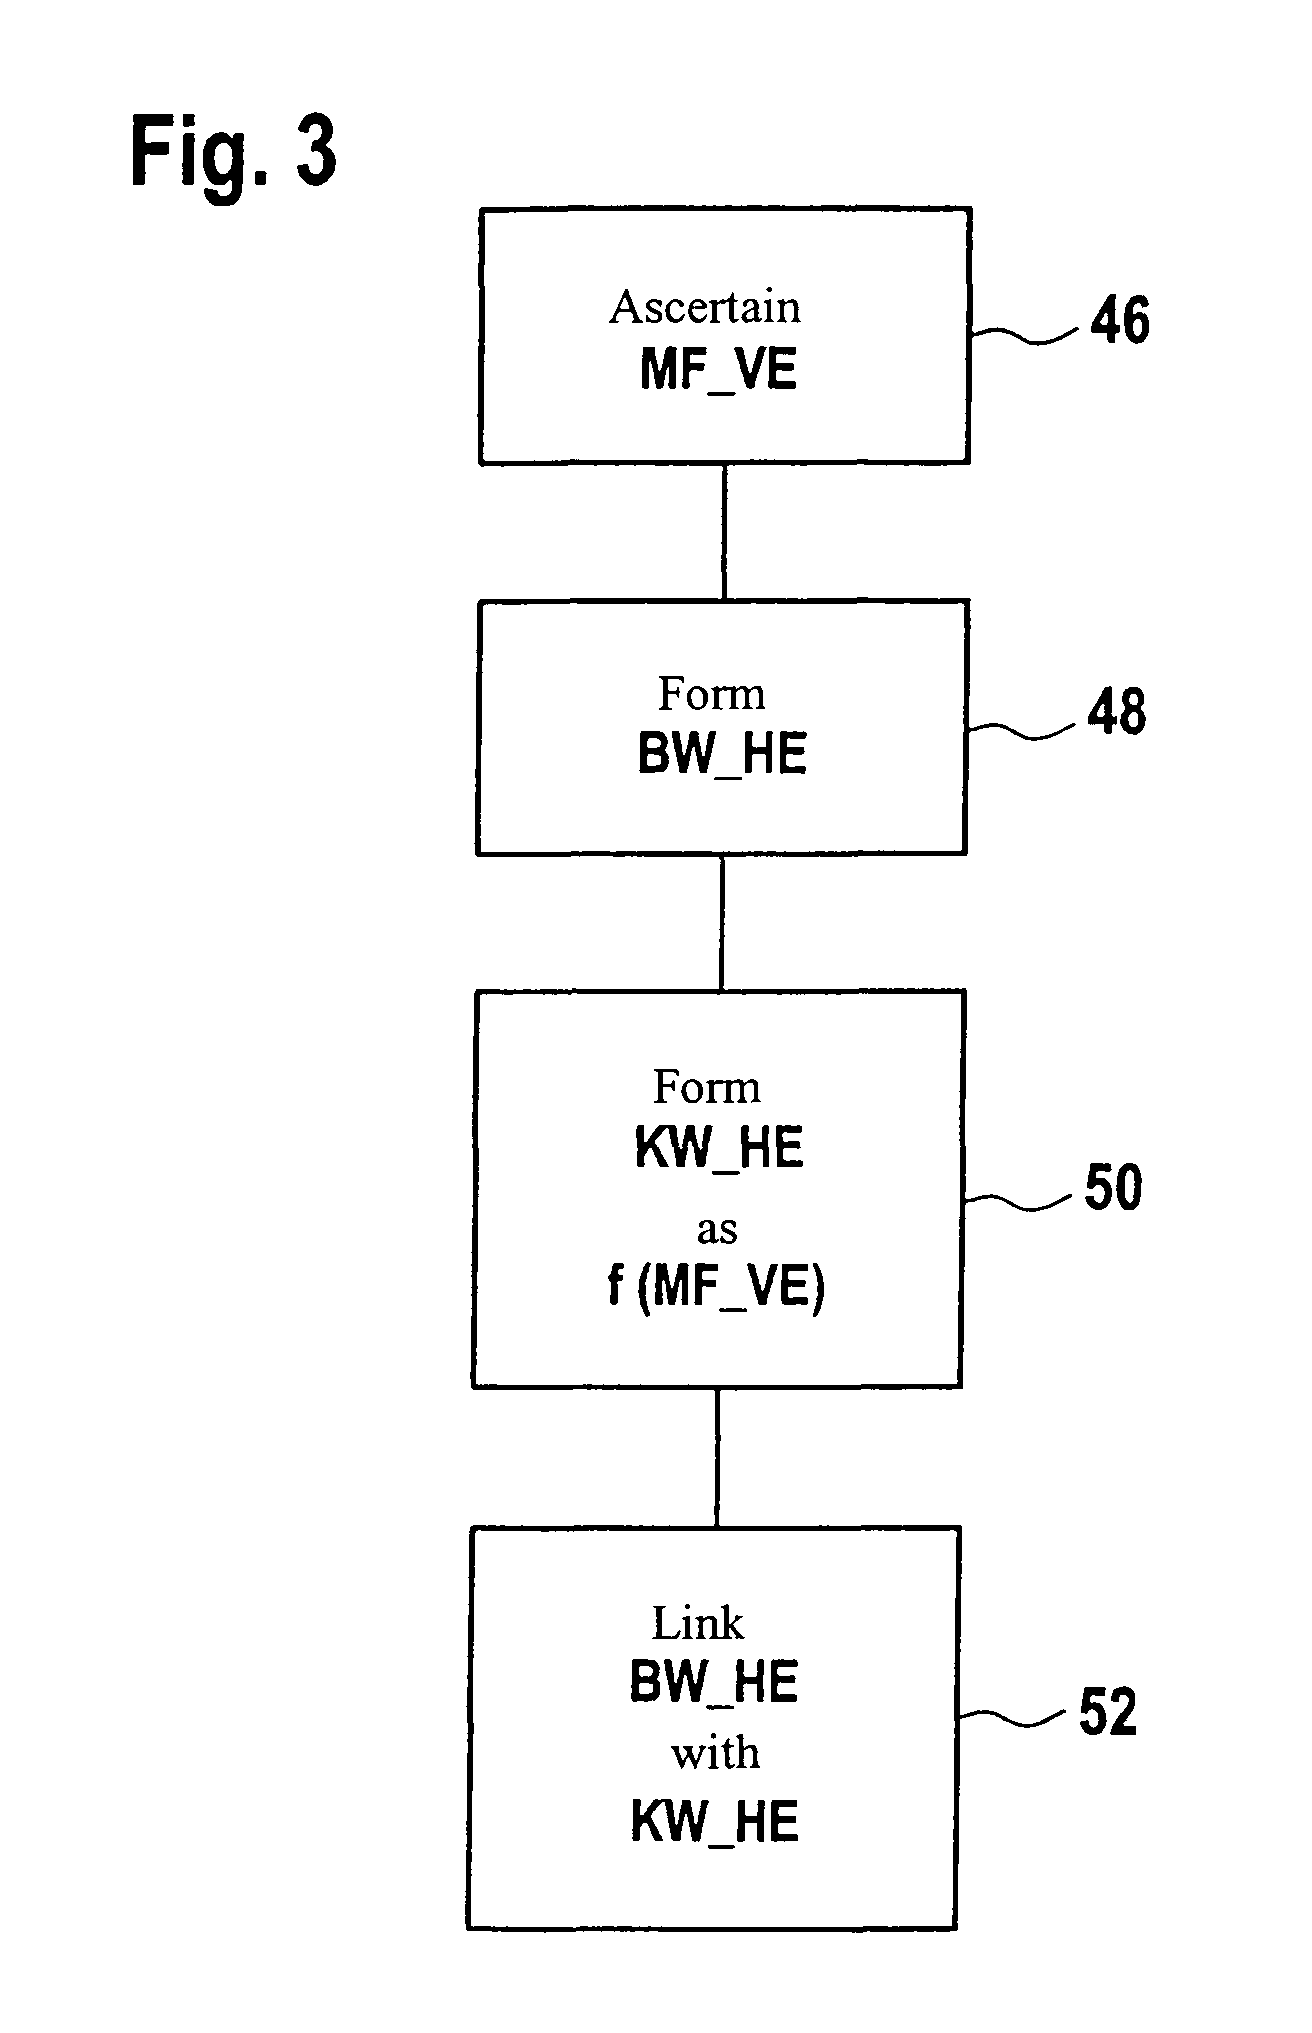 Method and control device for metering fuel to combustion chambers of an internal combustion engine